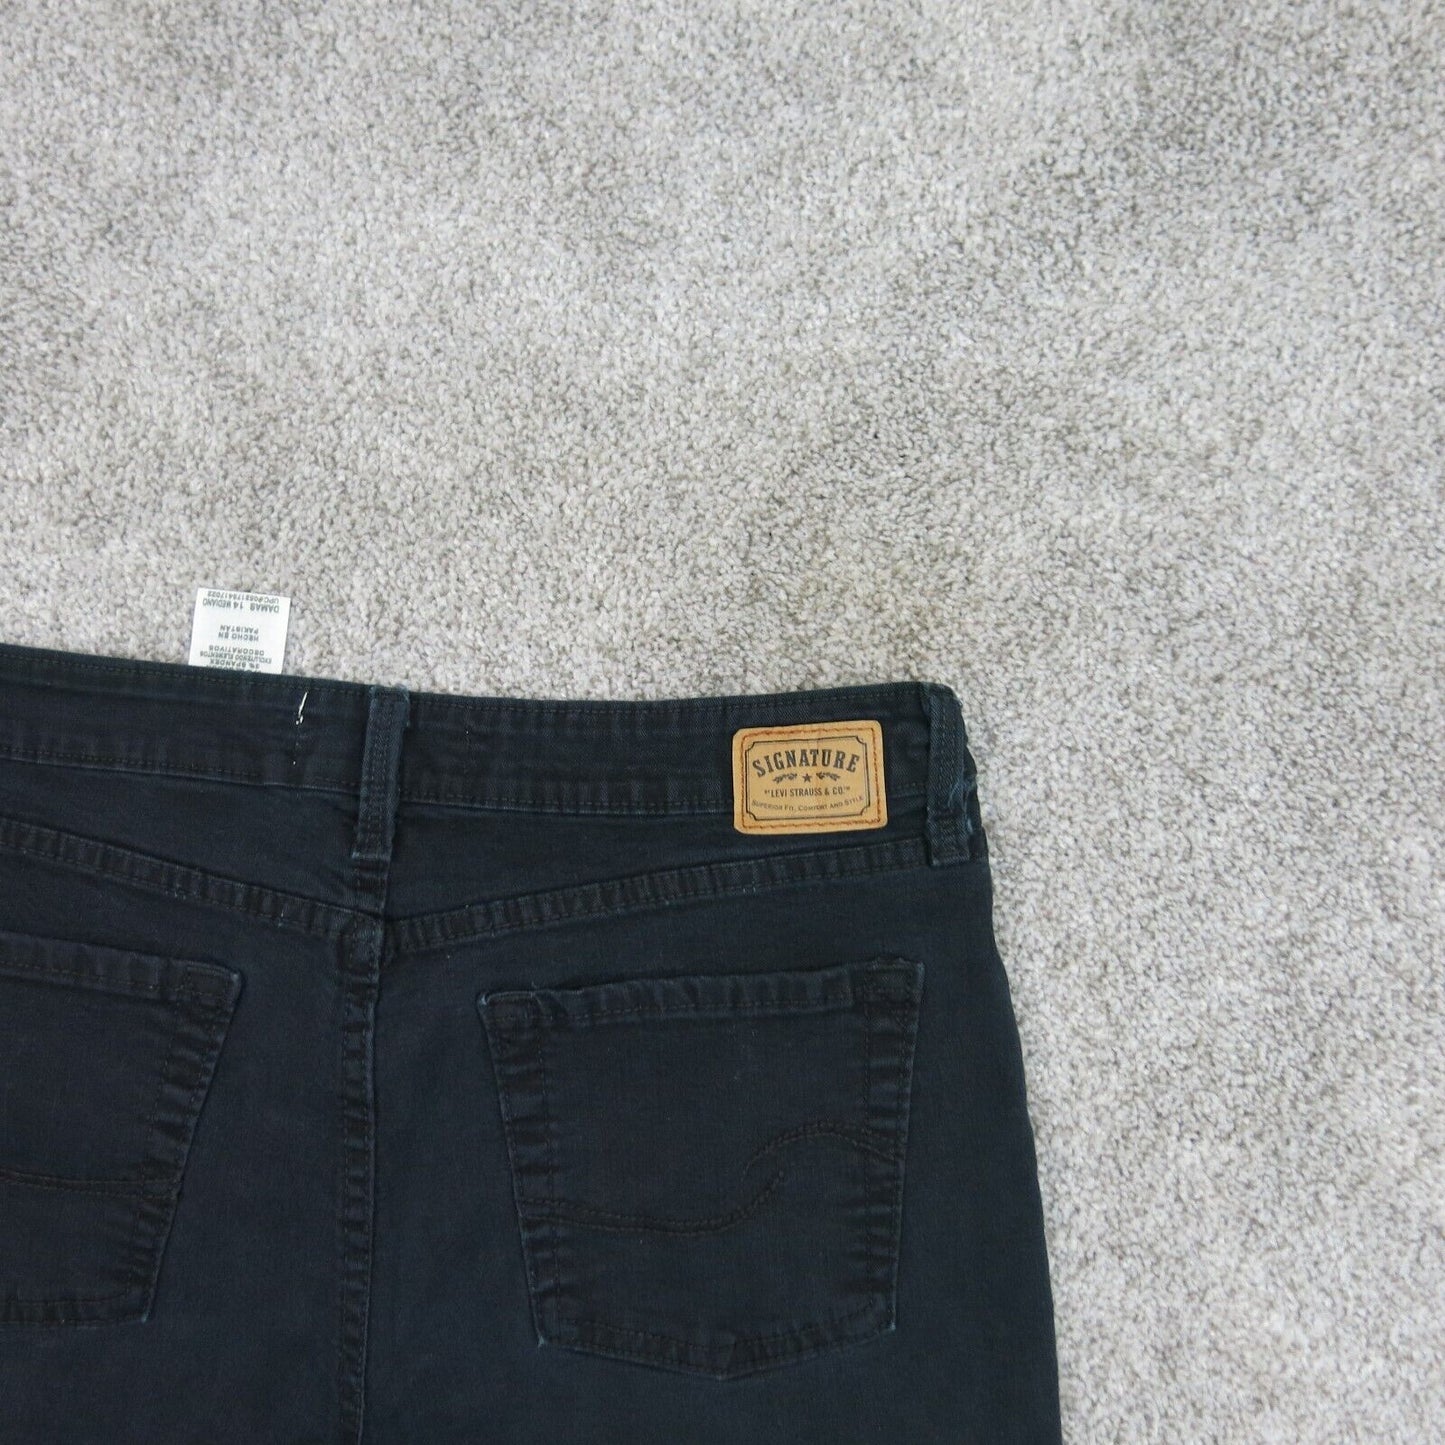 Signature By Levi Strauss Co Womens Bootcut Jeans Cotton High Rise Black SZ 14 M